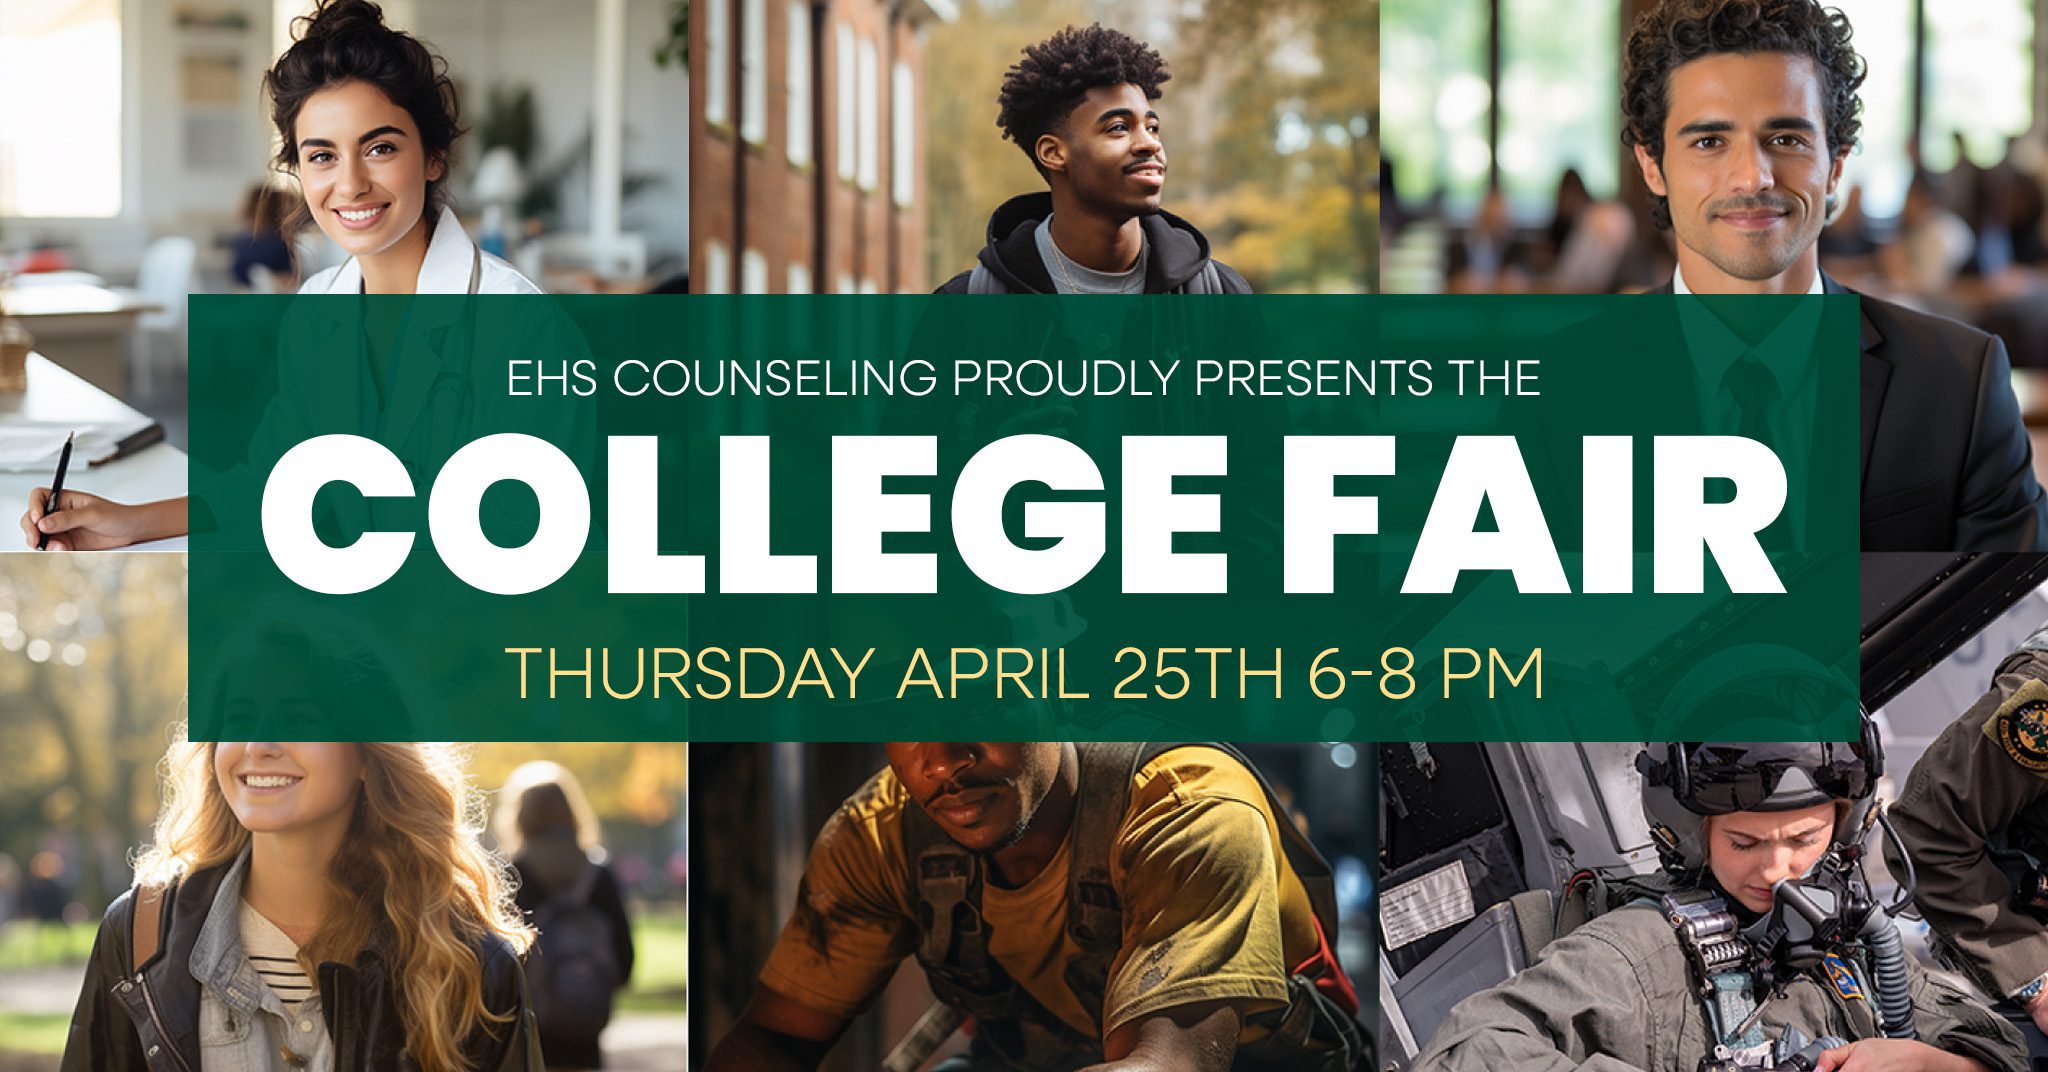 EHS COUNSELING PROUDLY PRESENTS: THE COLLEGE FAIR